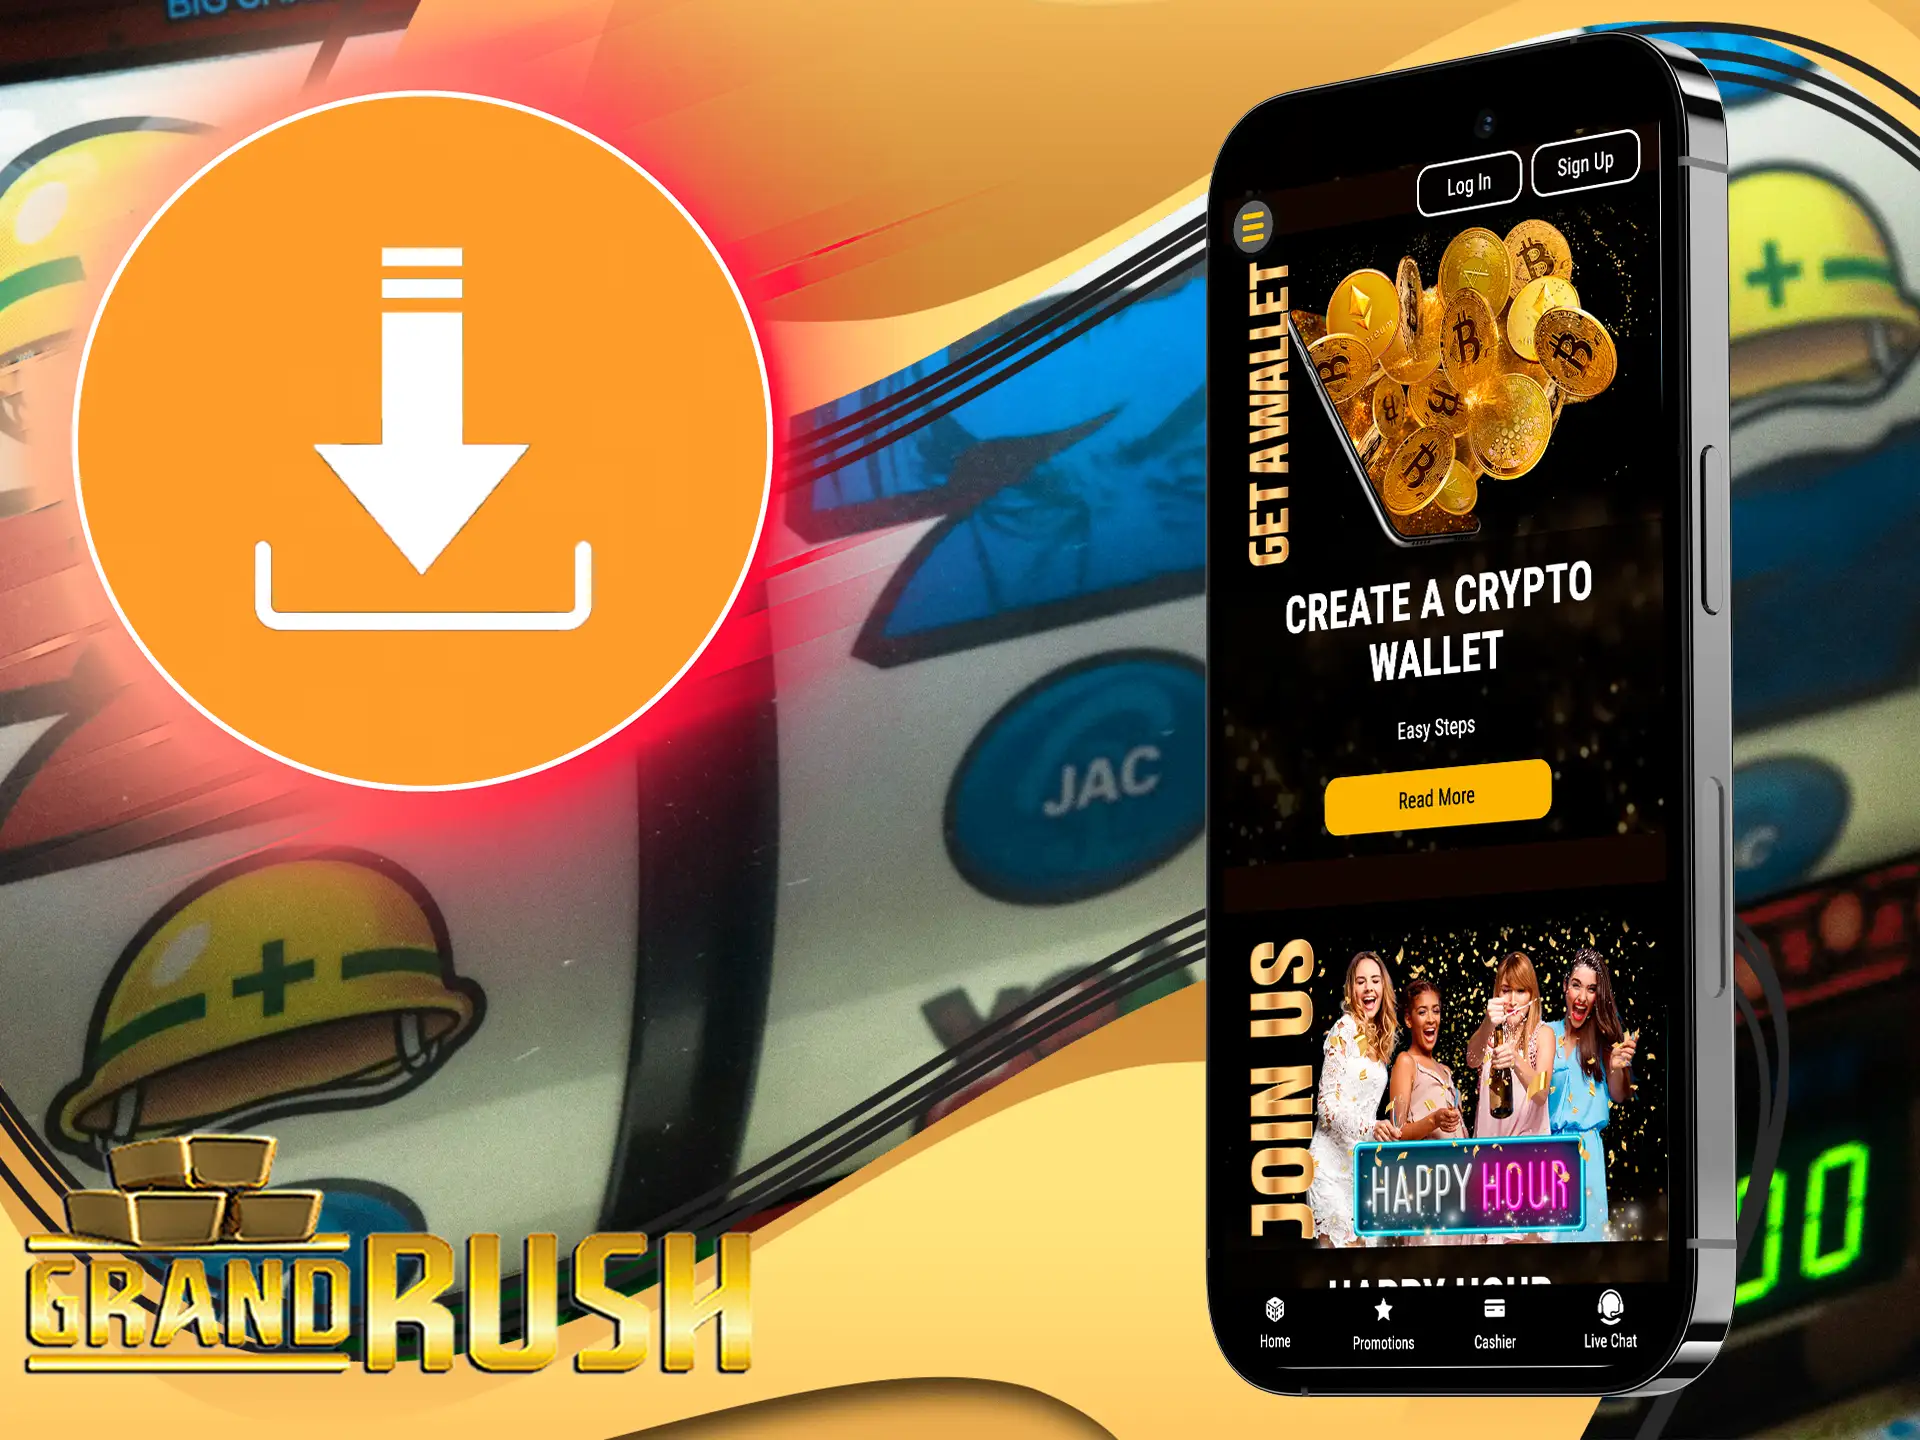 You can safely download the Grand Rush Casino app without fear of breaking the law, it is completely legal in Australia.